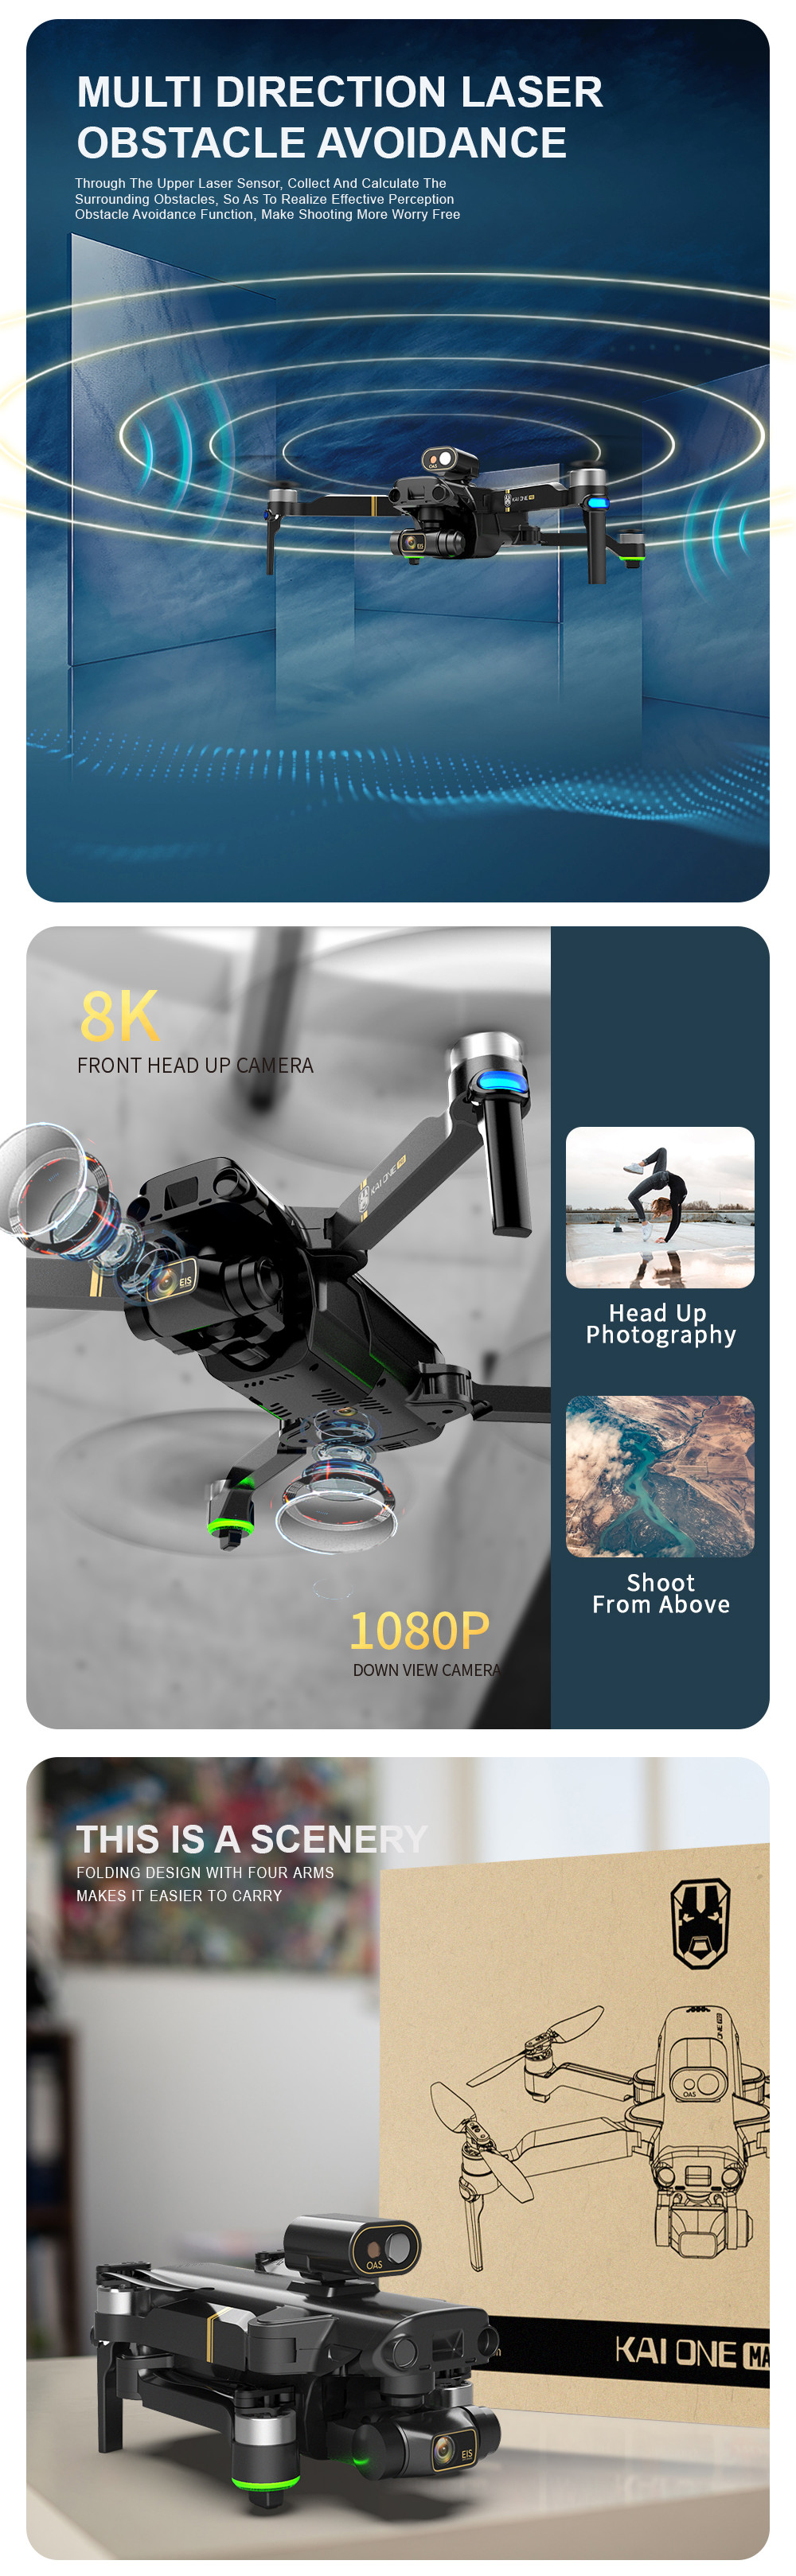 KAIONE-ProMax-5G-Wifi-1KM-FPV-With-3-axis-Gimbal-8K-Camera-Obstacle-Avoidance-GPS-EIS-Brushless-RC-D-1827415-2